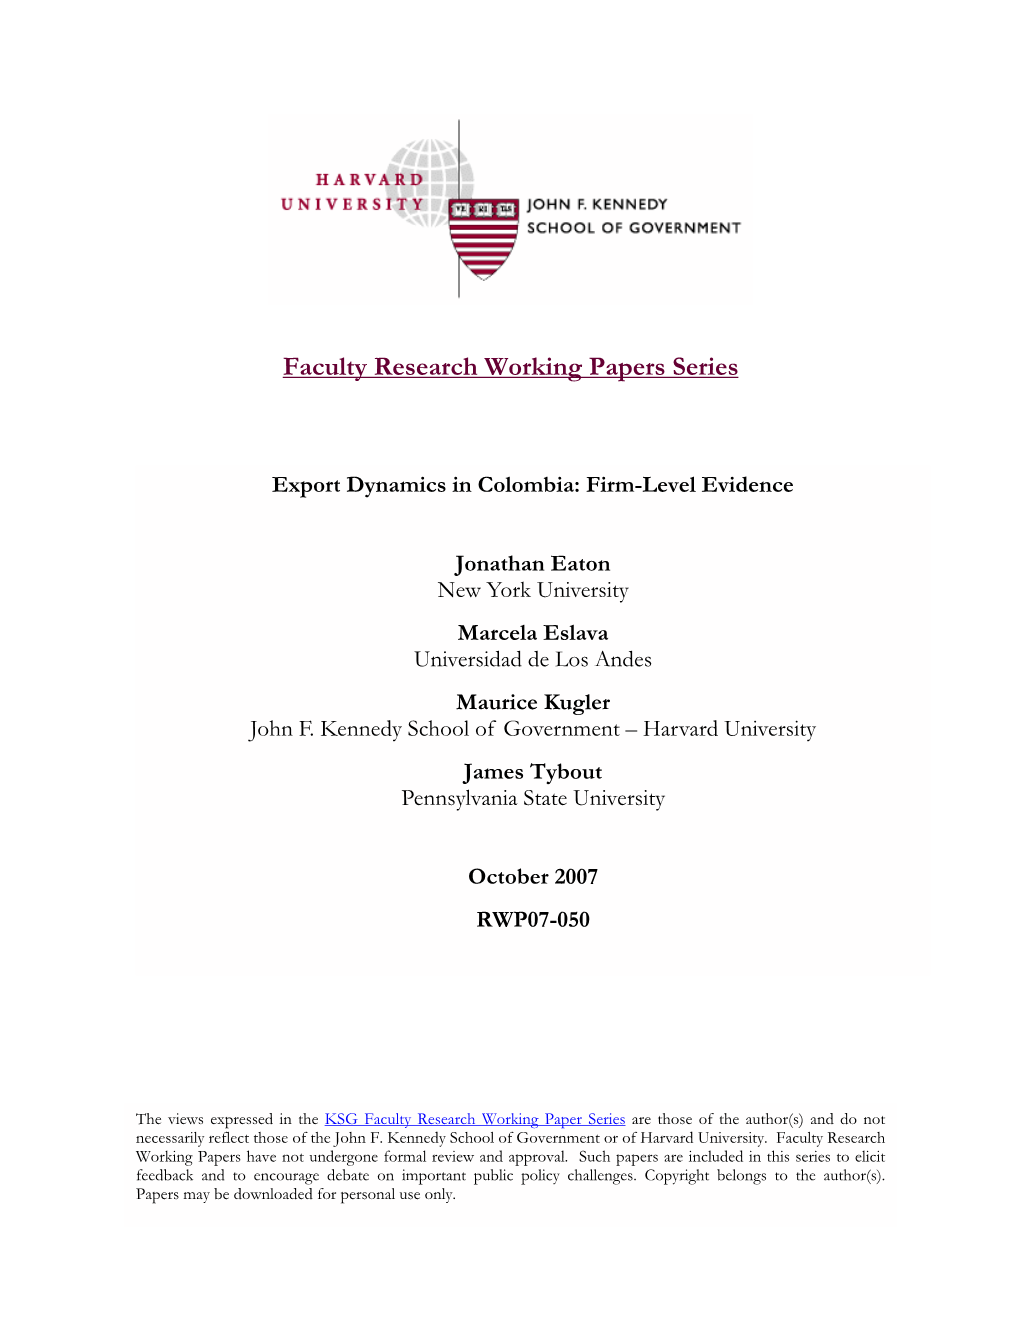 Export Dynamics in Colombia: Firm-Level Evidence